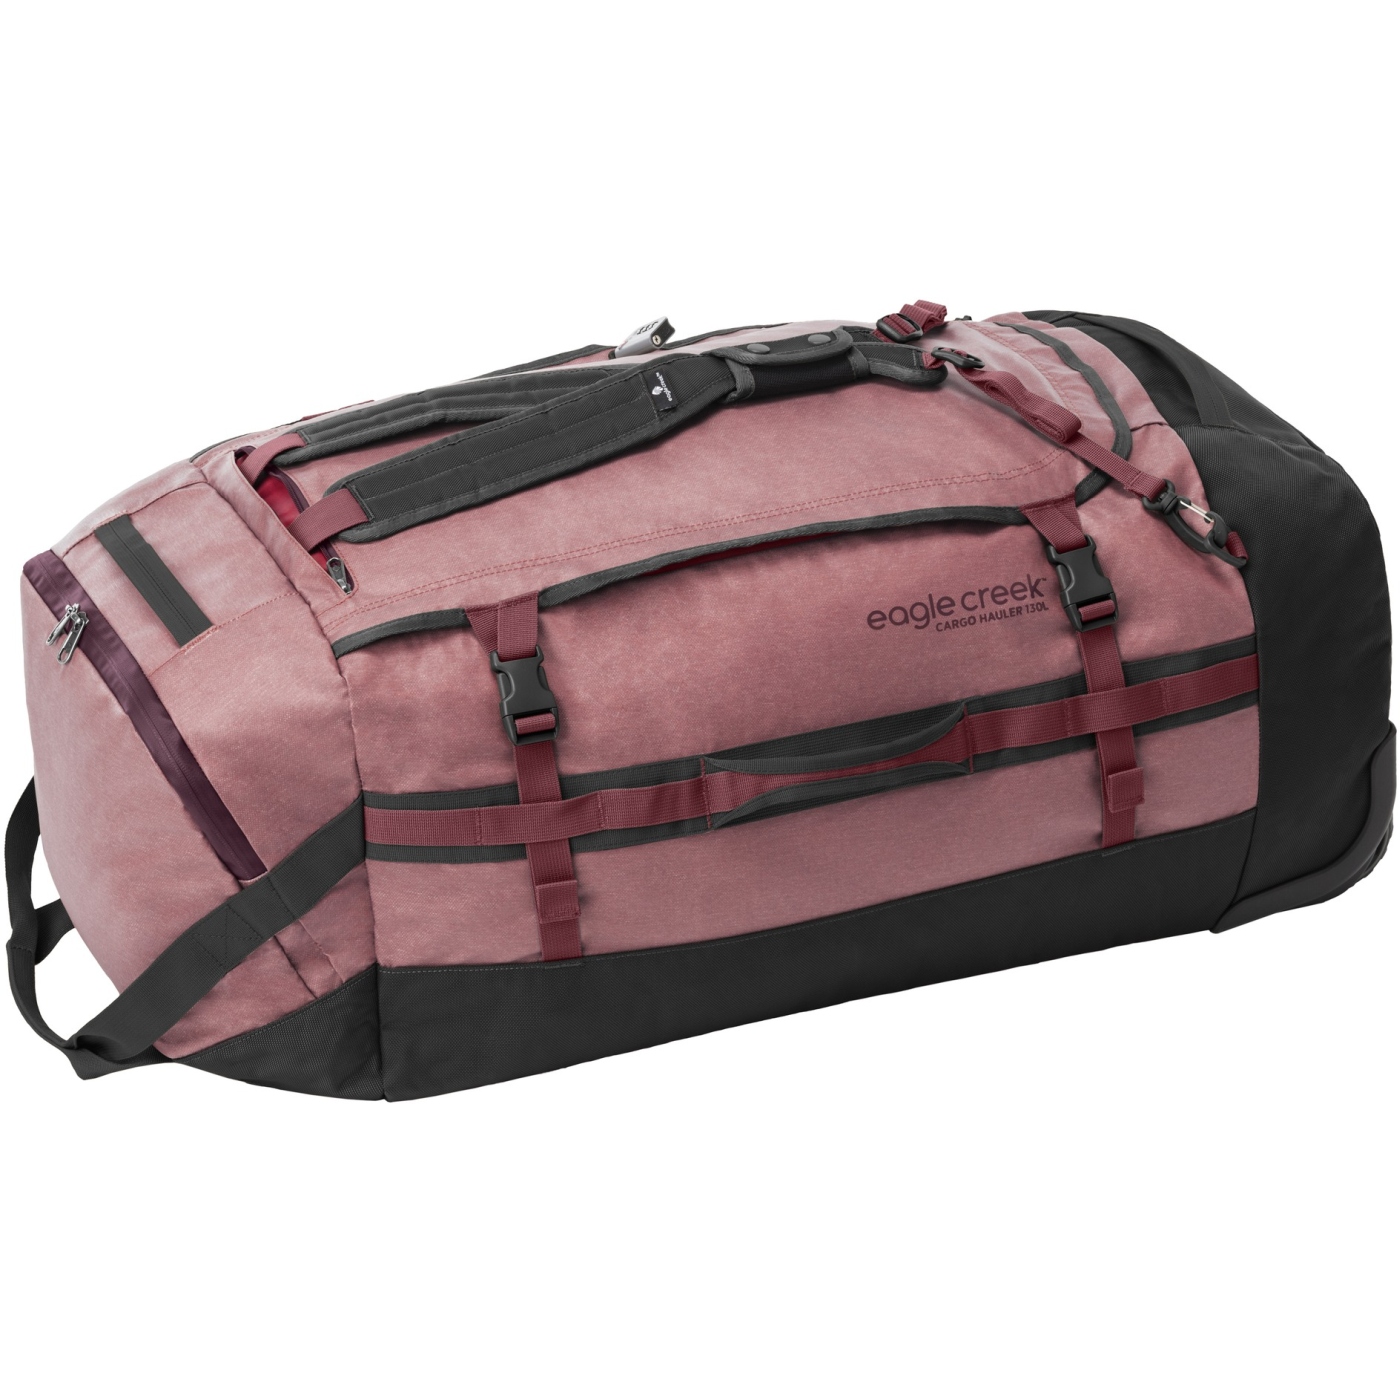 Picture of Eagle Creek Cargo Hauler Wheeled Duffel - Travel Bag - 130 L - earth red